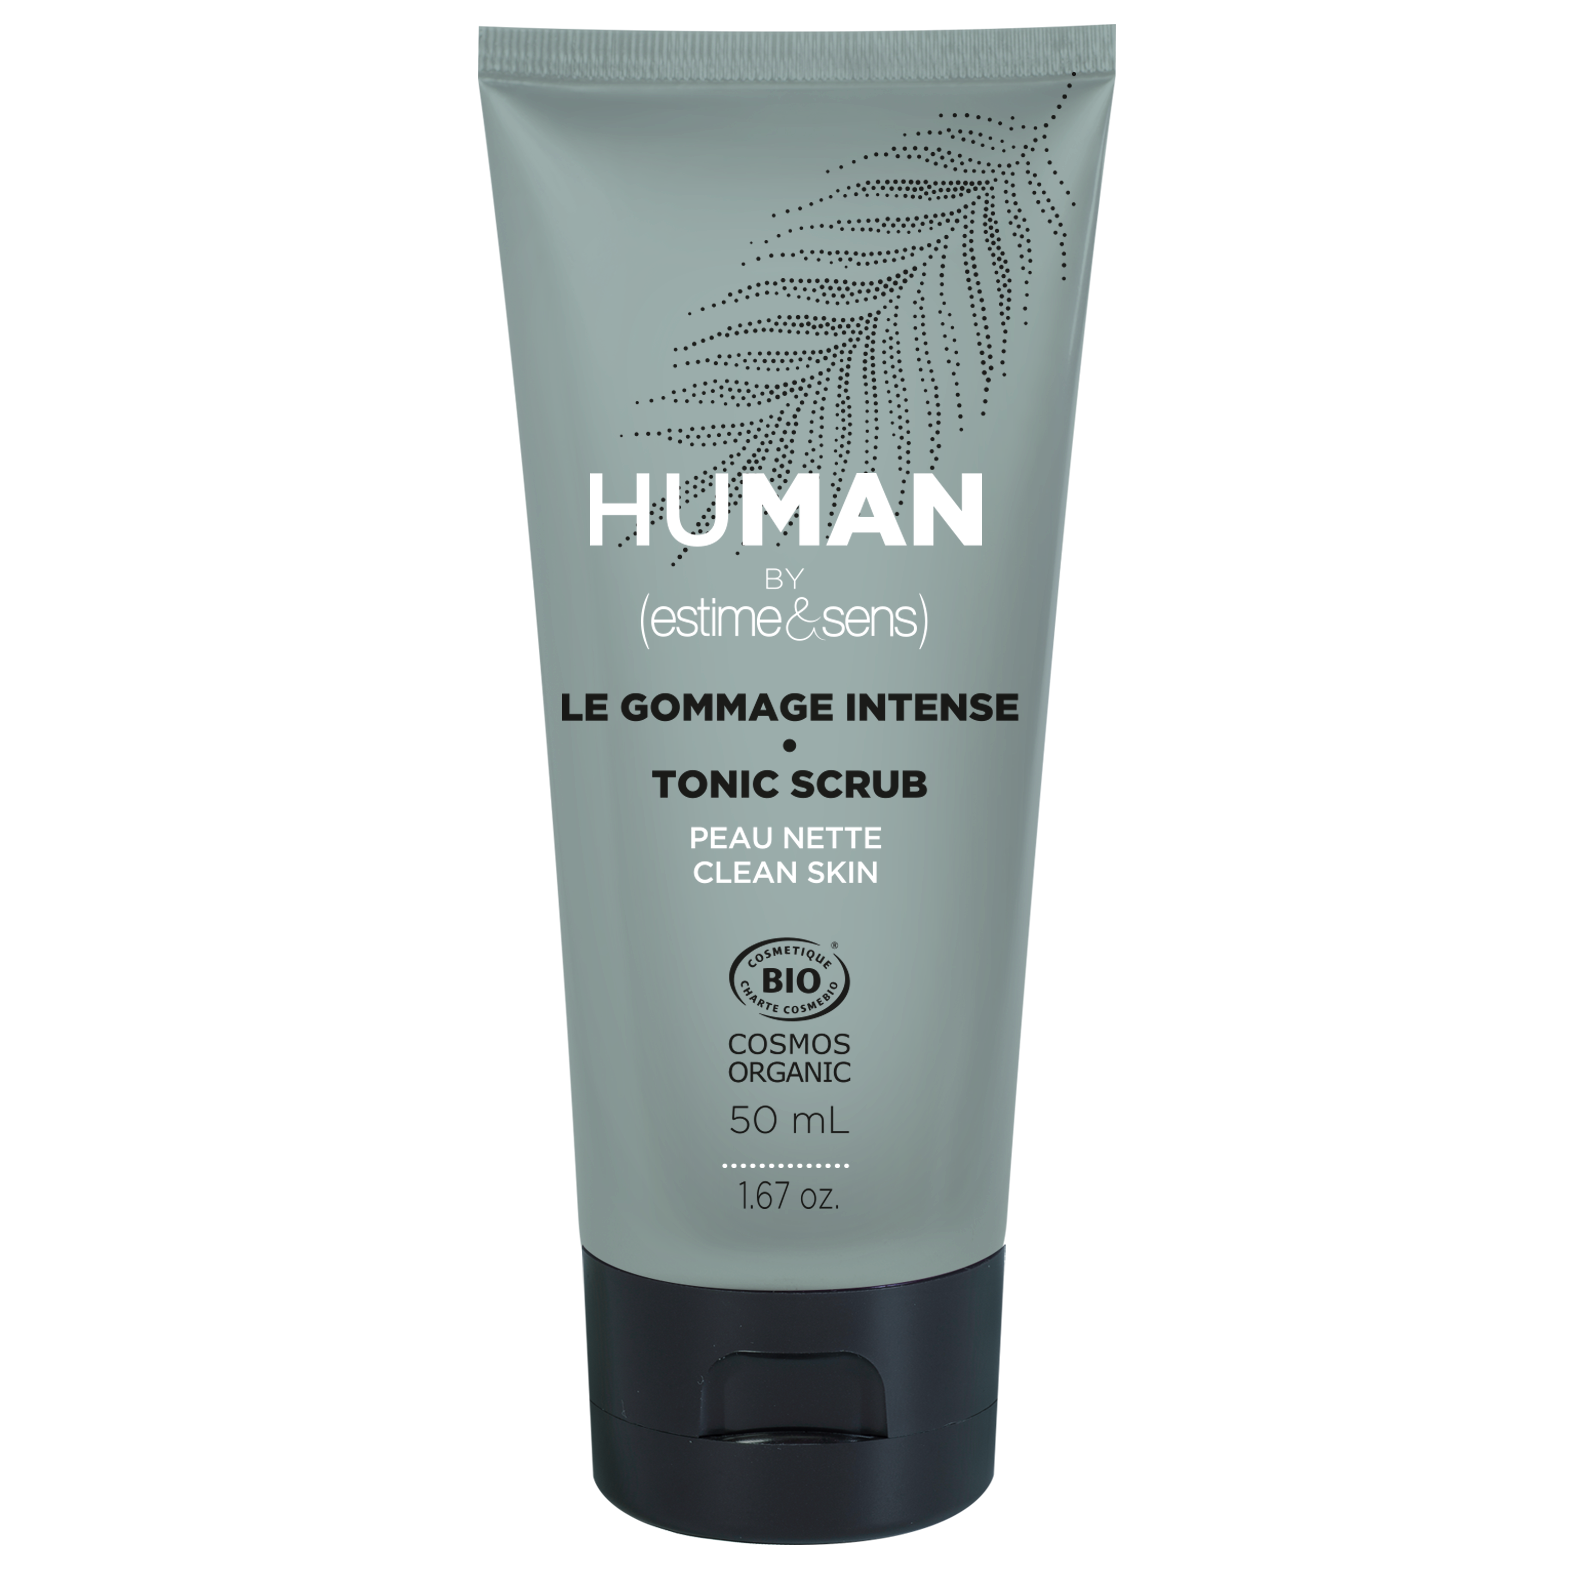 Human - Le Gommage Intense